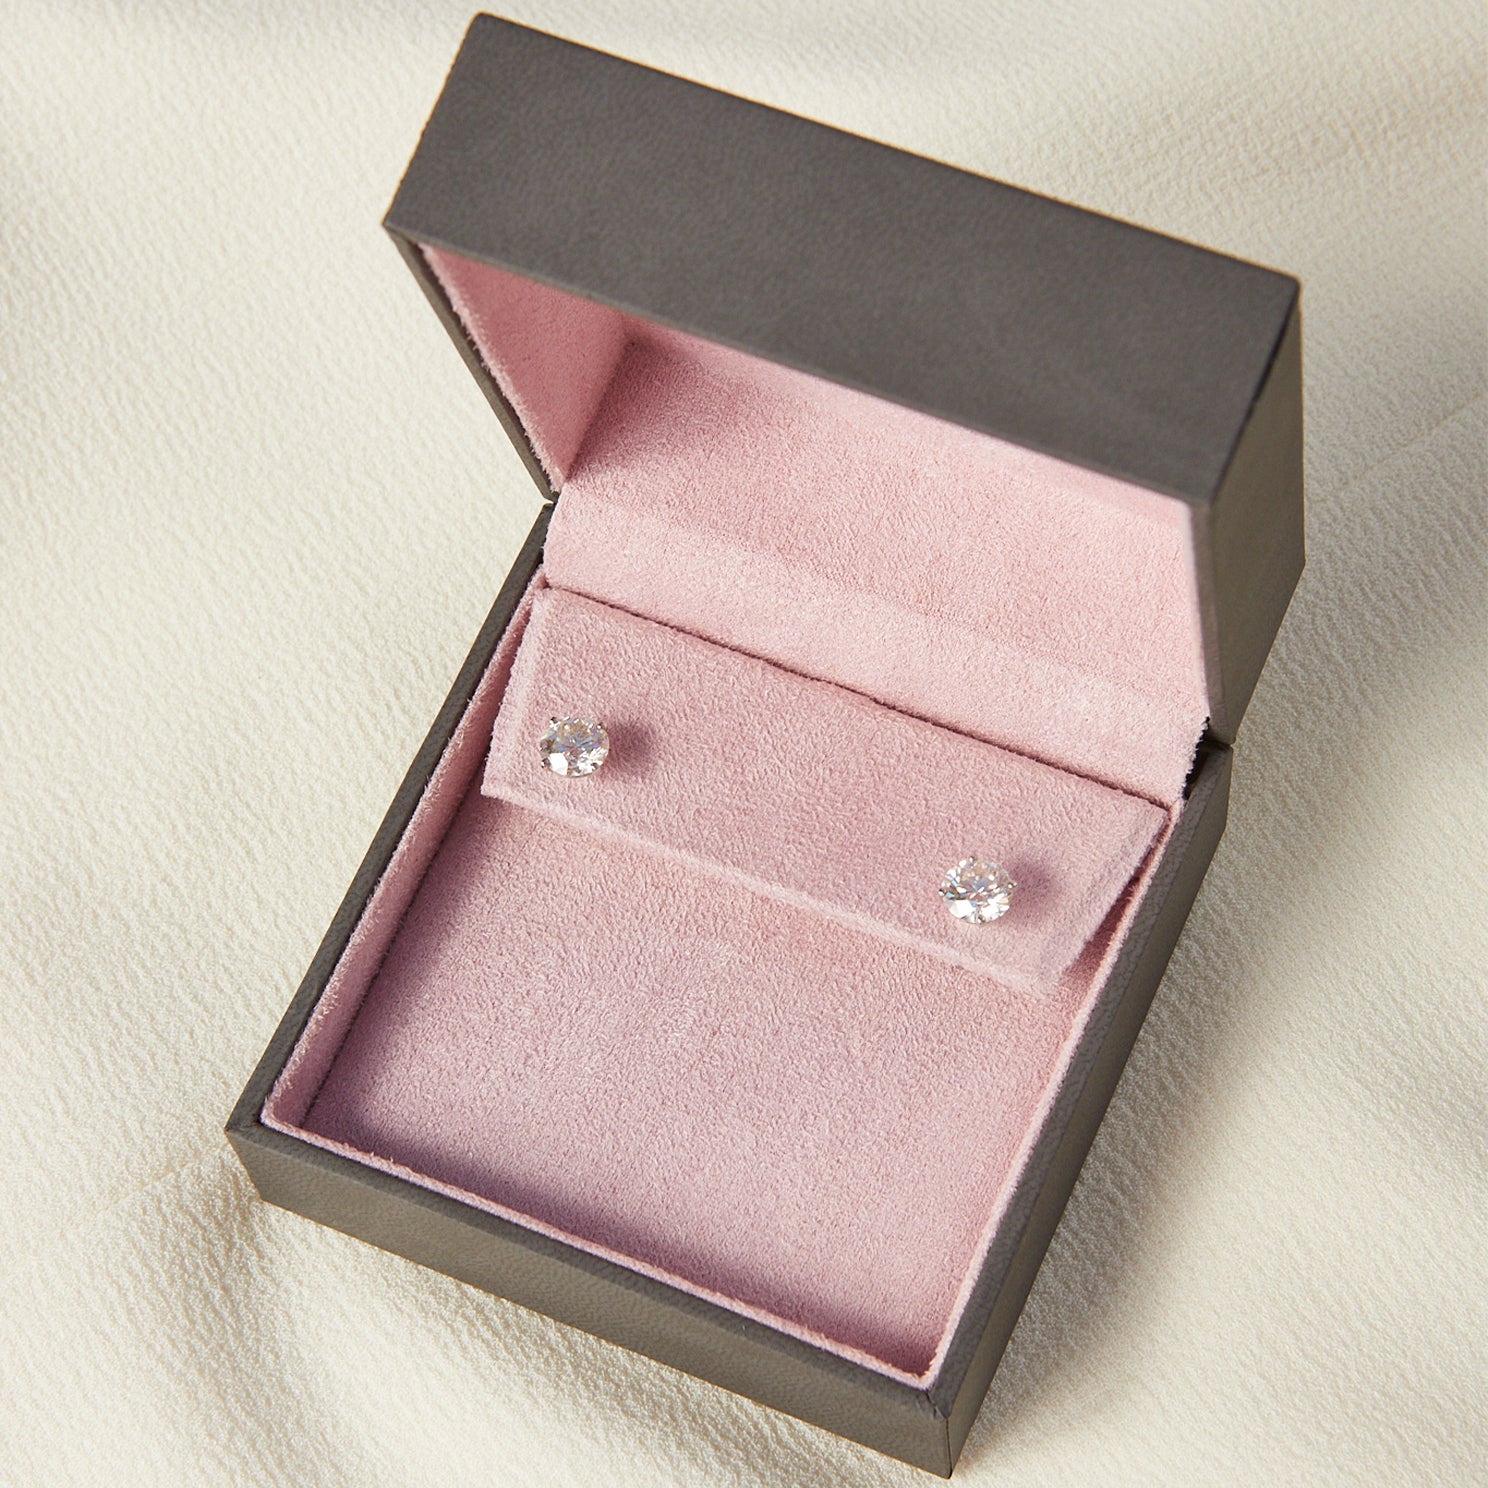 Round Diamond Solitaire Stud Earrings in platinum setting inside pink and grey jewelry packaging